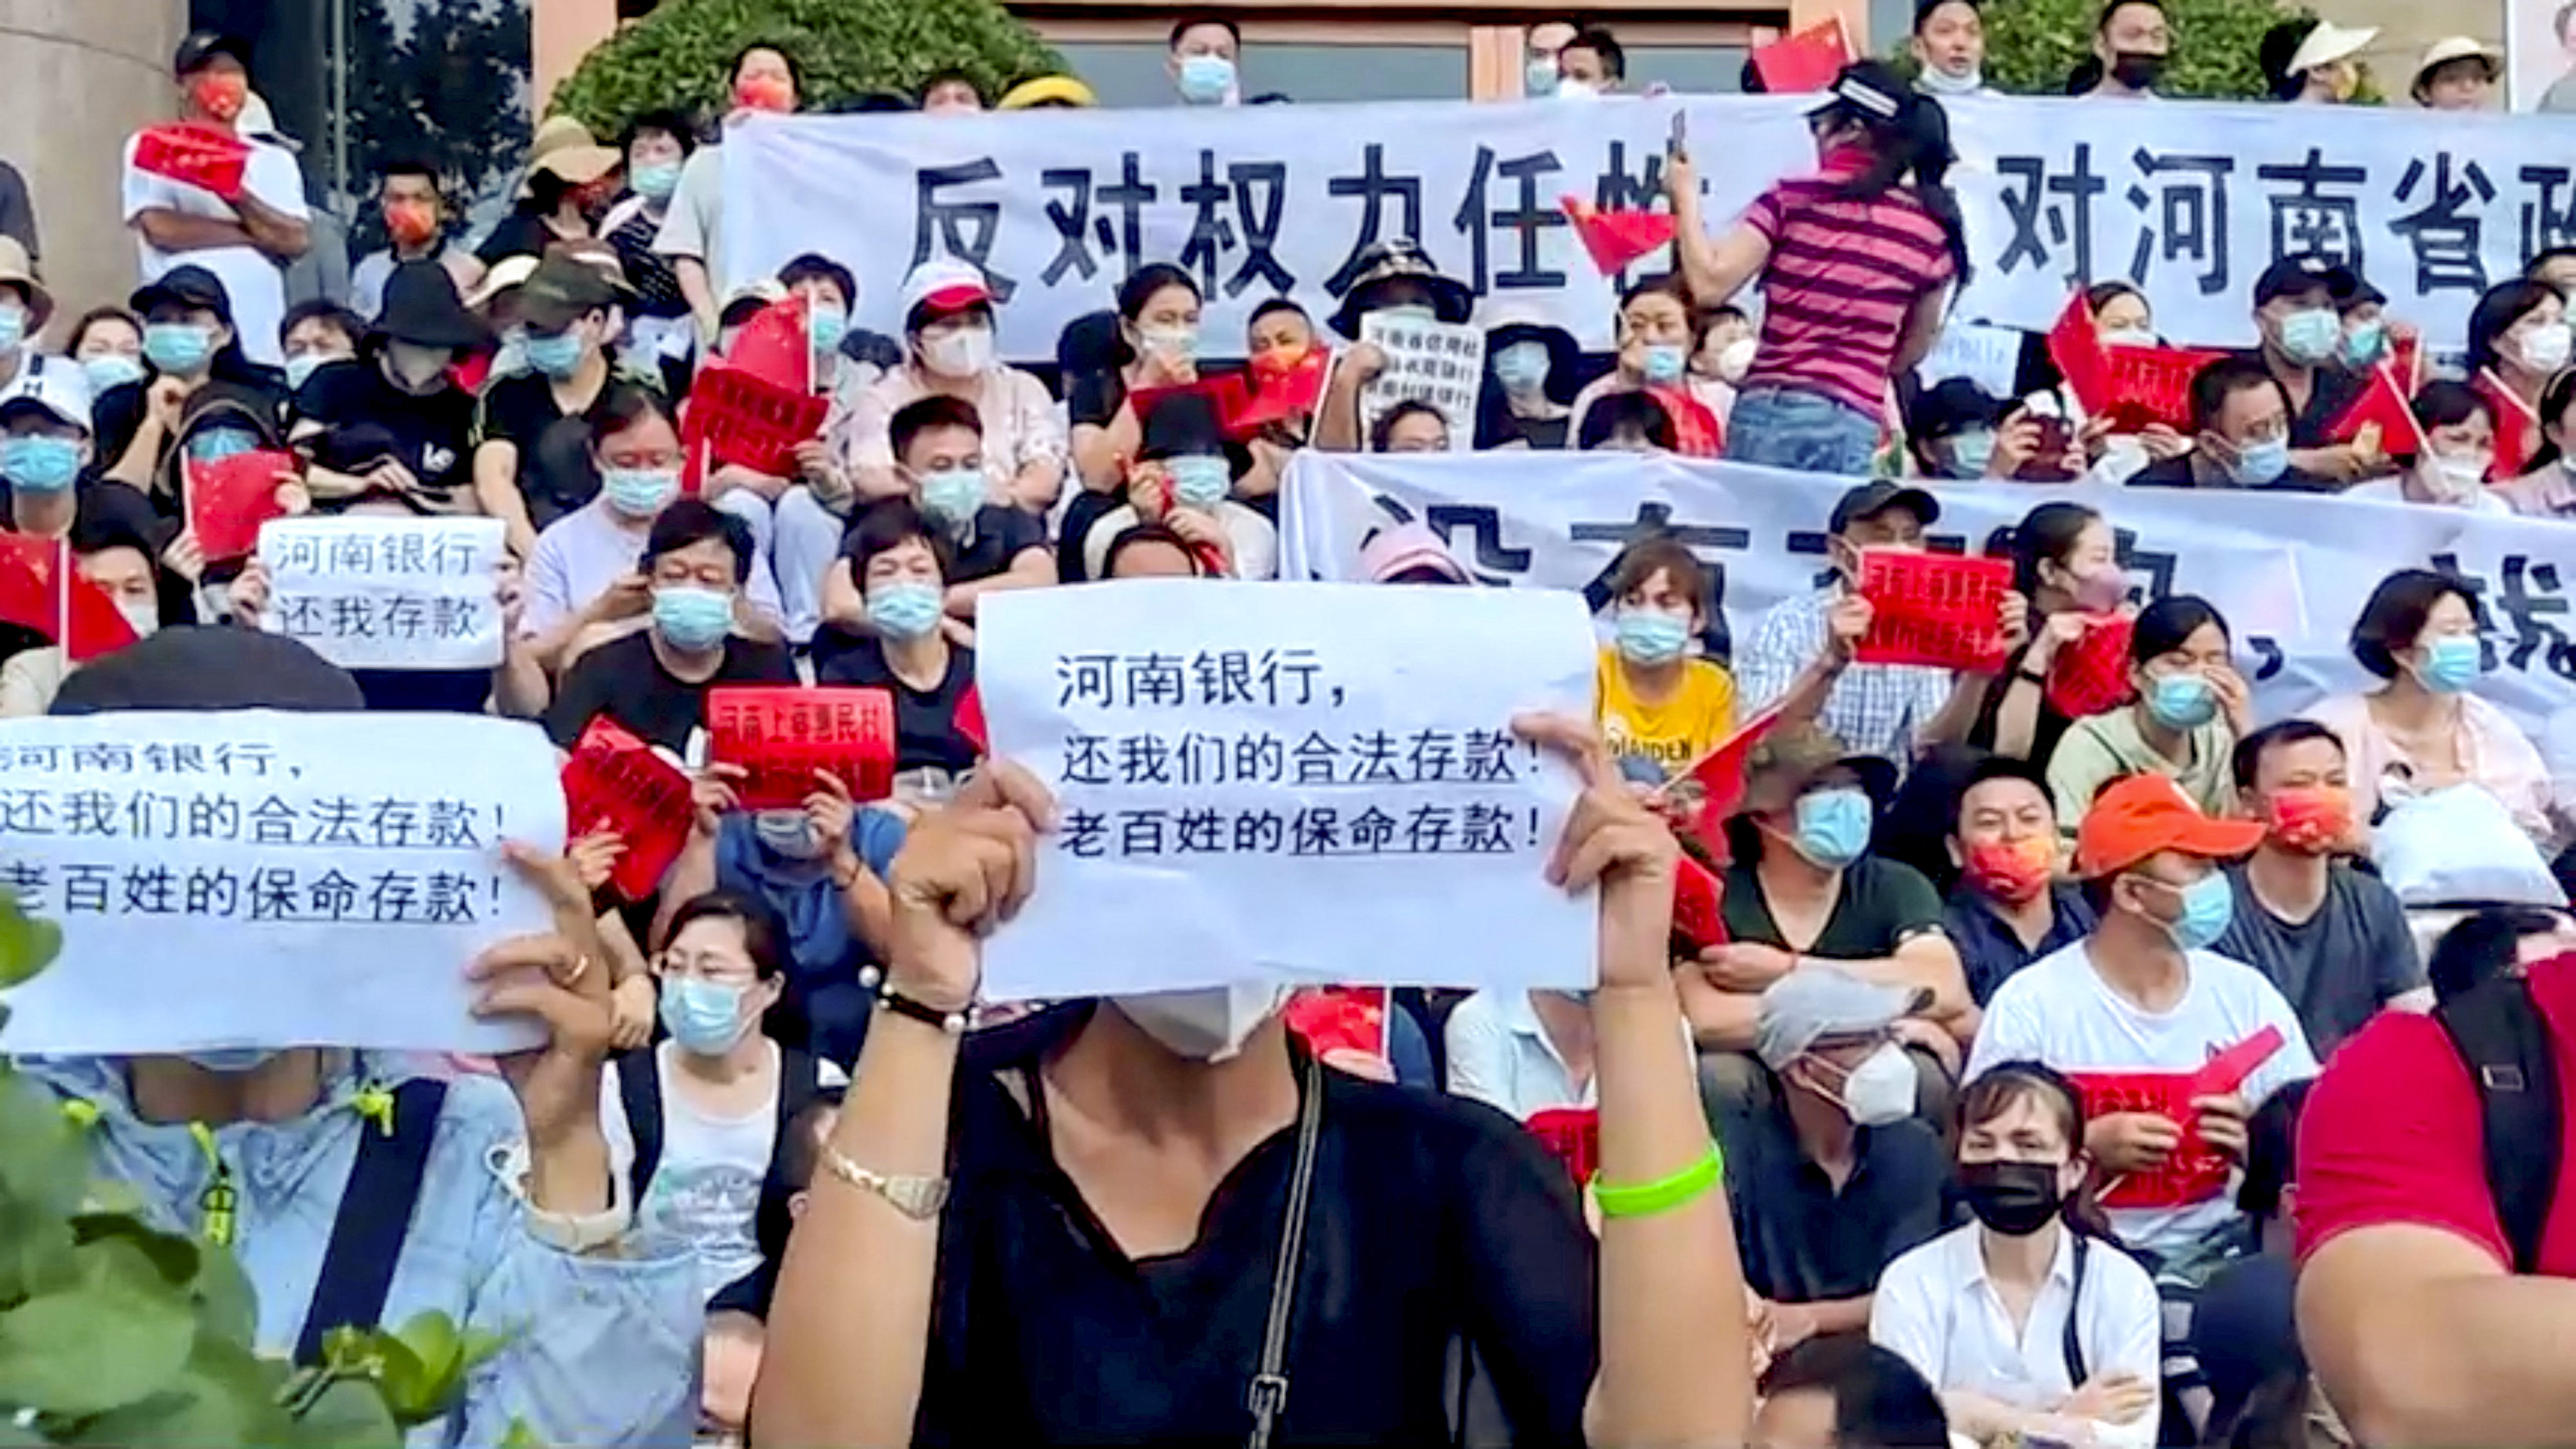 On Sunday, July 10, demonstrators hold up signs protesting against the freezing of deposits by some rural-based banks, outside a People’s Bank of China building in Zhengzhou, Henan province. The text in the foreground reads, “Henan Bank, return to us our legal deposits! The people’s life-saving deposits!” Photo: Reuters